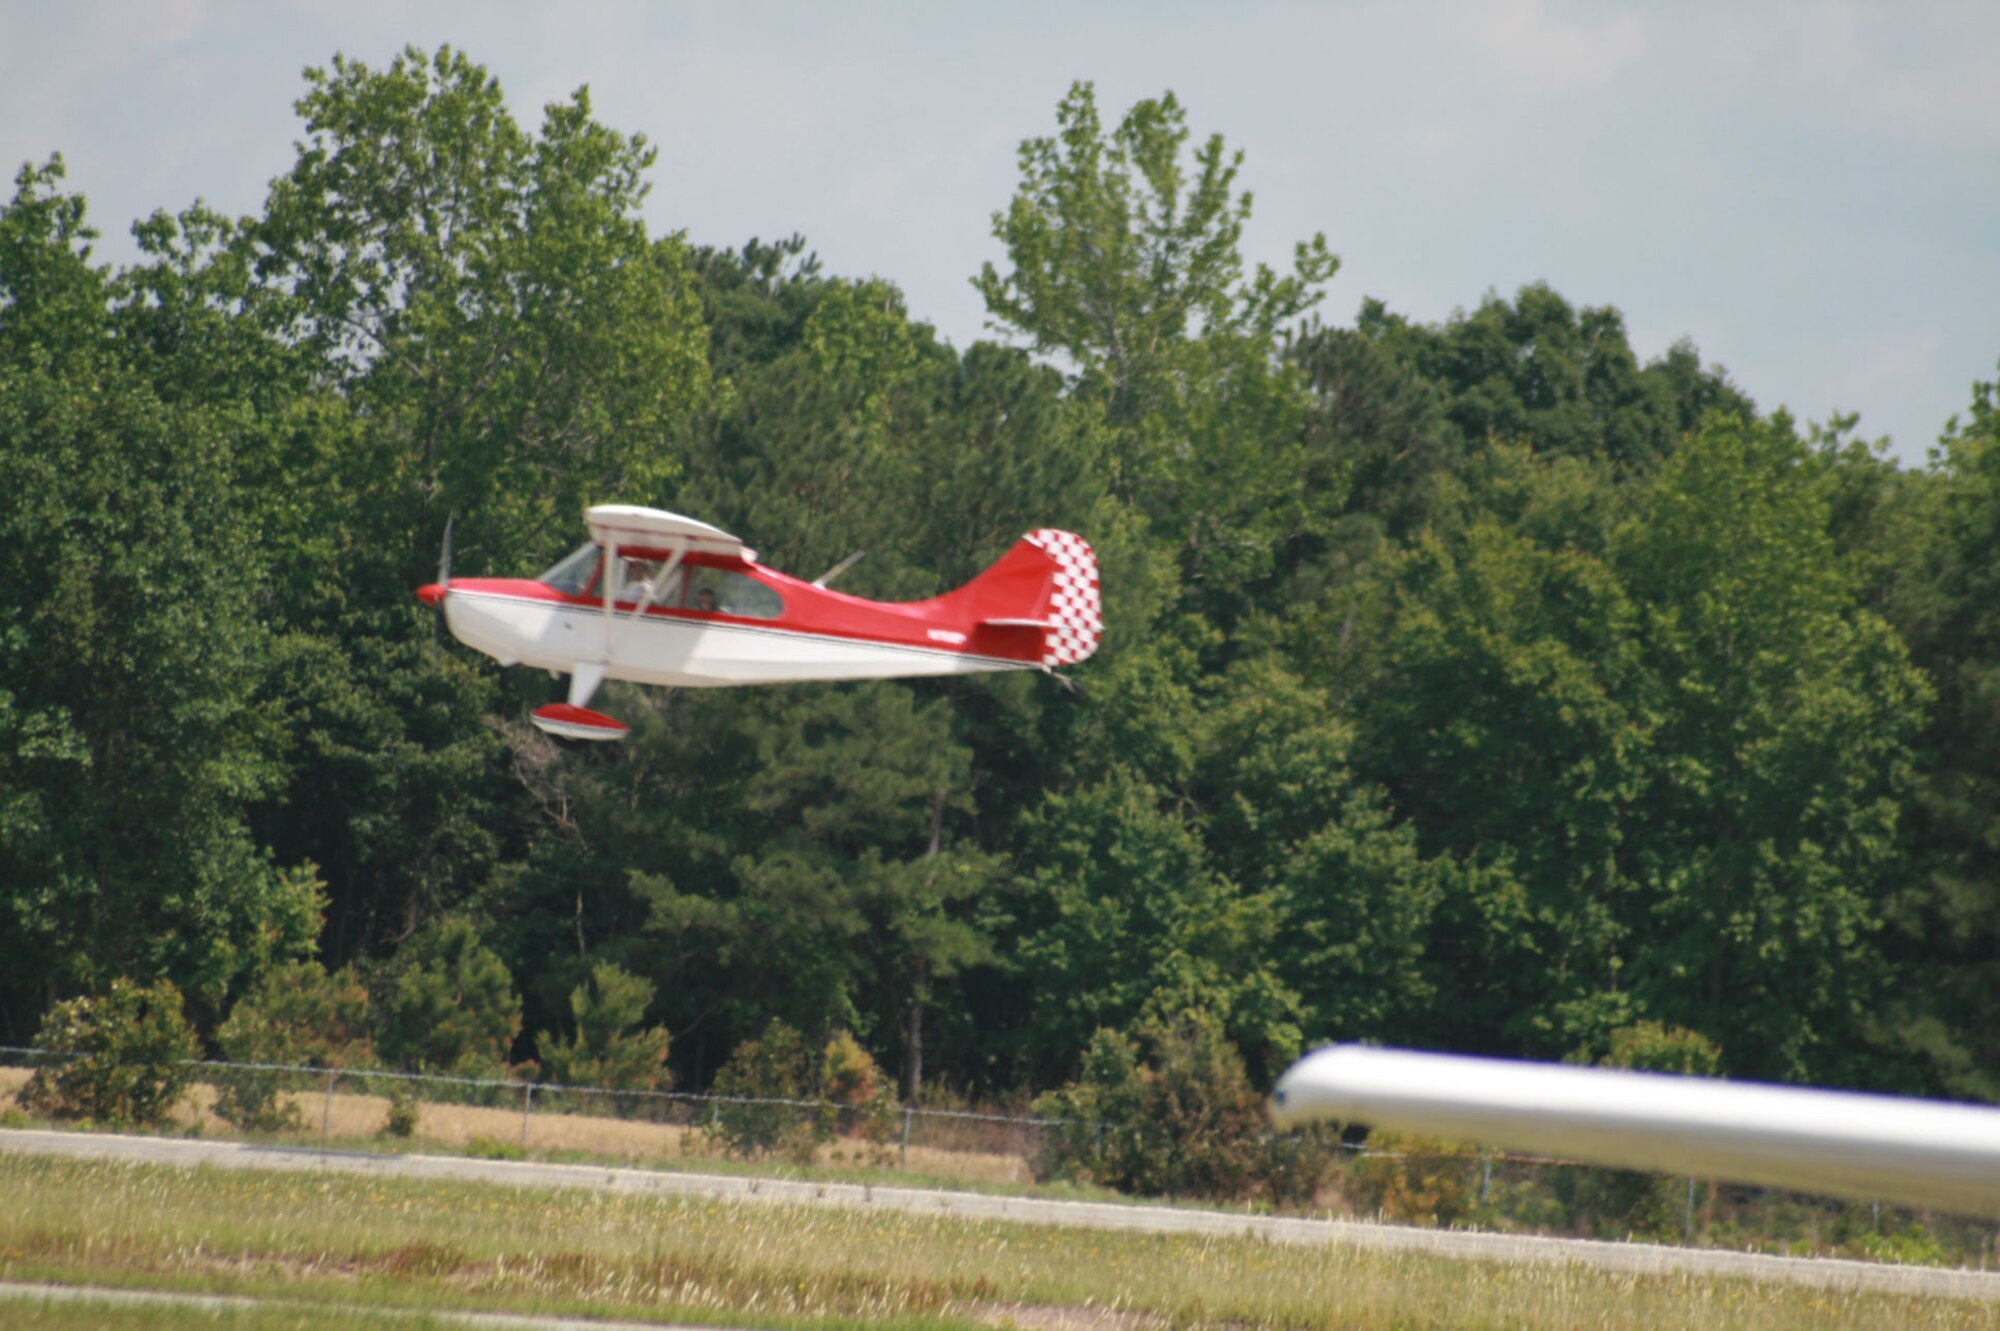 SEYMOUR JOHNSON AIR FORCE BASE, N.C. - Lieutenant. Col. James Jinnette, 335th Fighter Squadron commander, takes off in his Aeronca 7 Champion airplane during the Experimental Aircraft Association Young Eagles Day at the Goldsboro/Wayne County Municipal Airport May 24.  More than 80 base youth participated in the day's activity.  The EAA Young Eagles program was launched in 1992 to give interested young people an opportunity to go flying in a general aviation airplane. (U.S. Air Force photo by Staff Sgt. Les Waters)